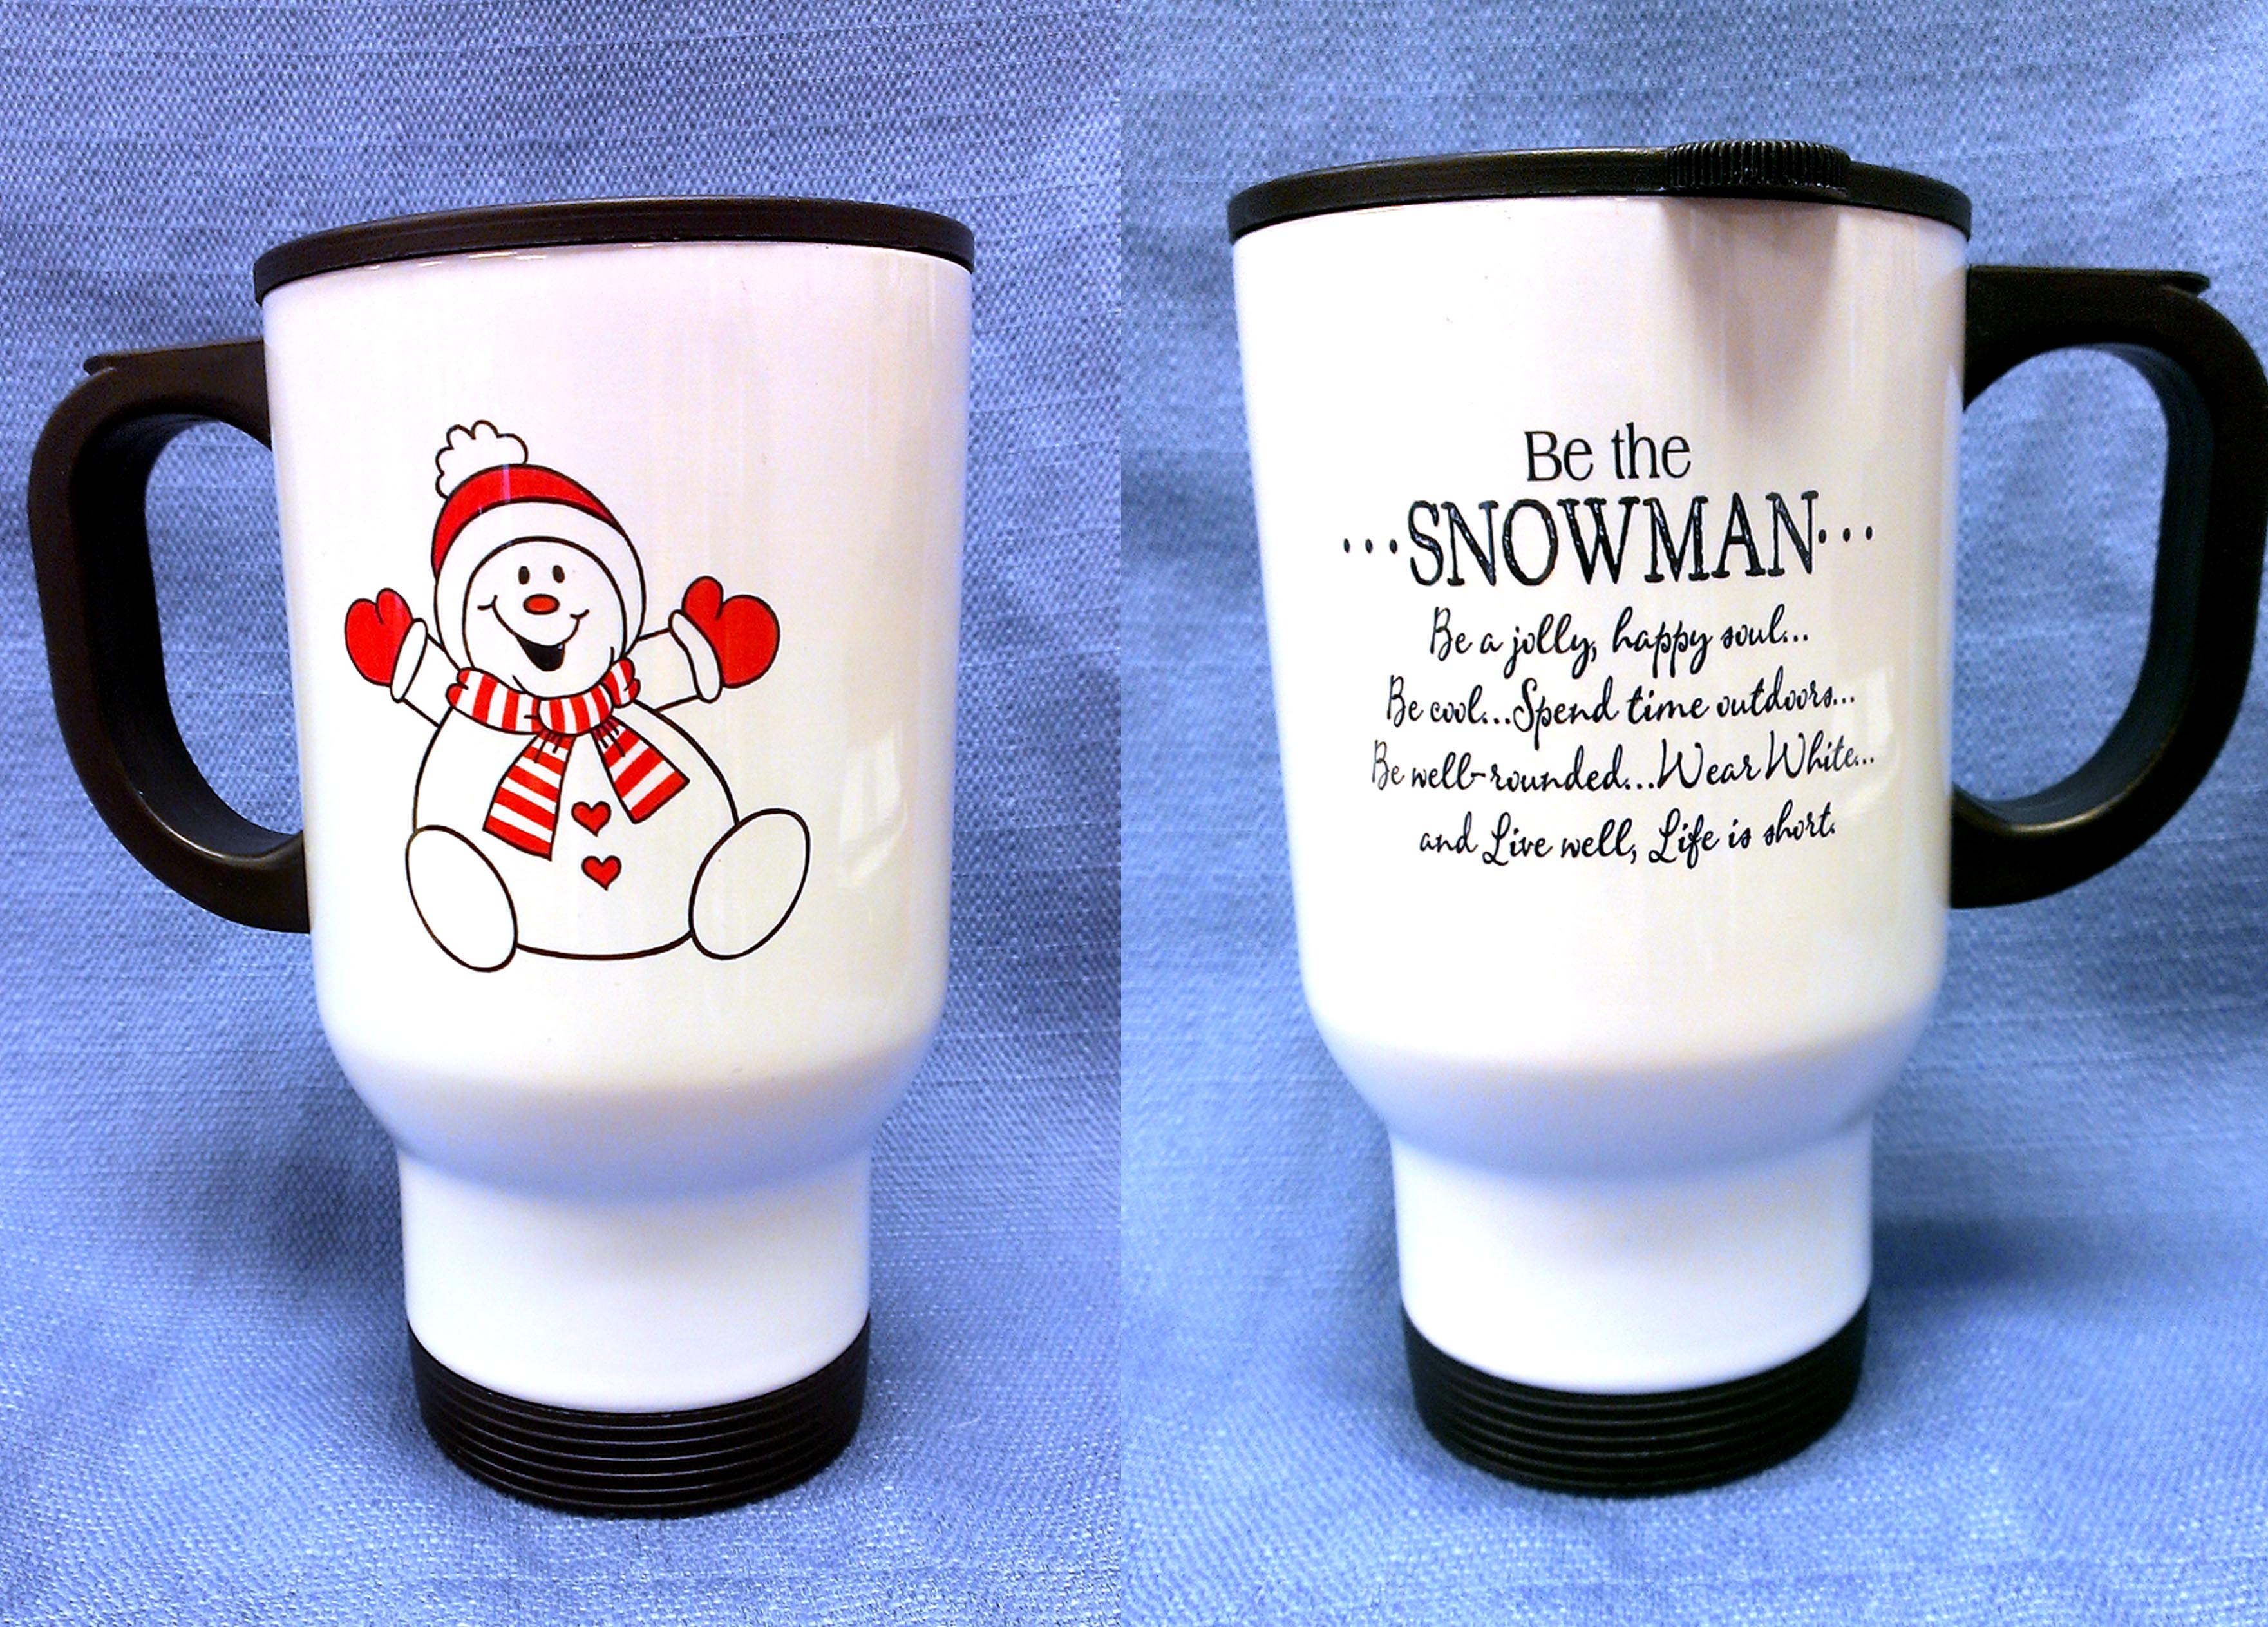 Be the Snowman made with sublimation printing